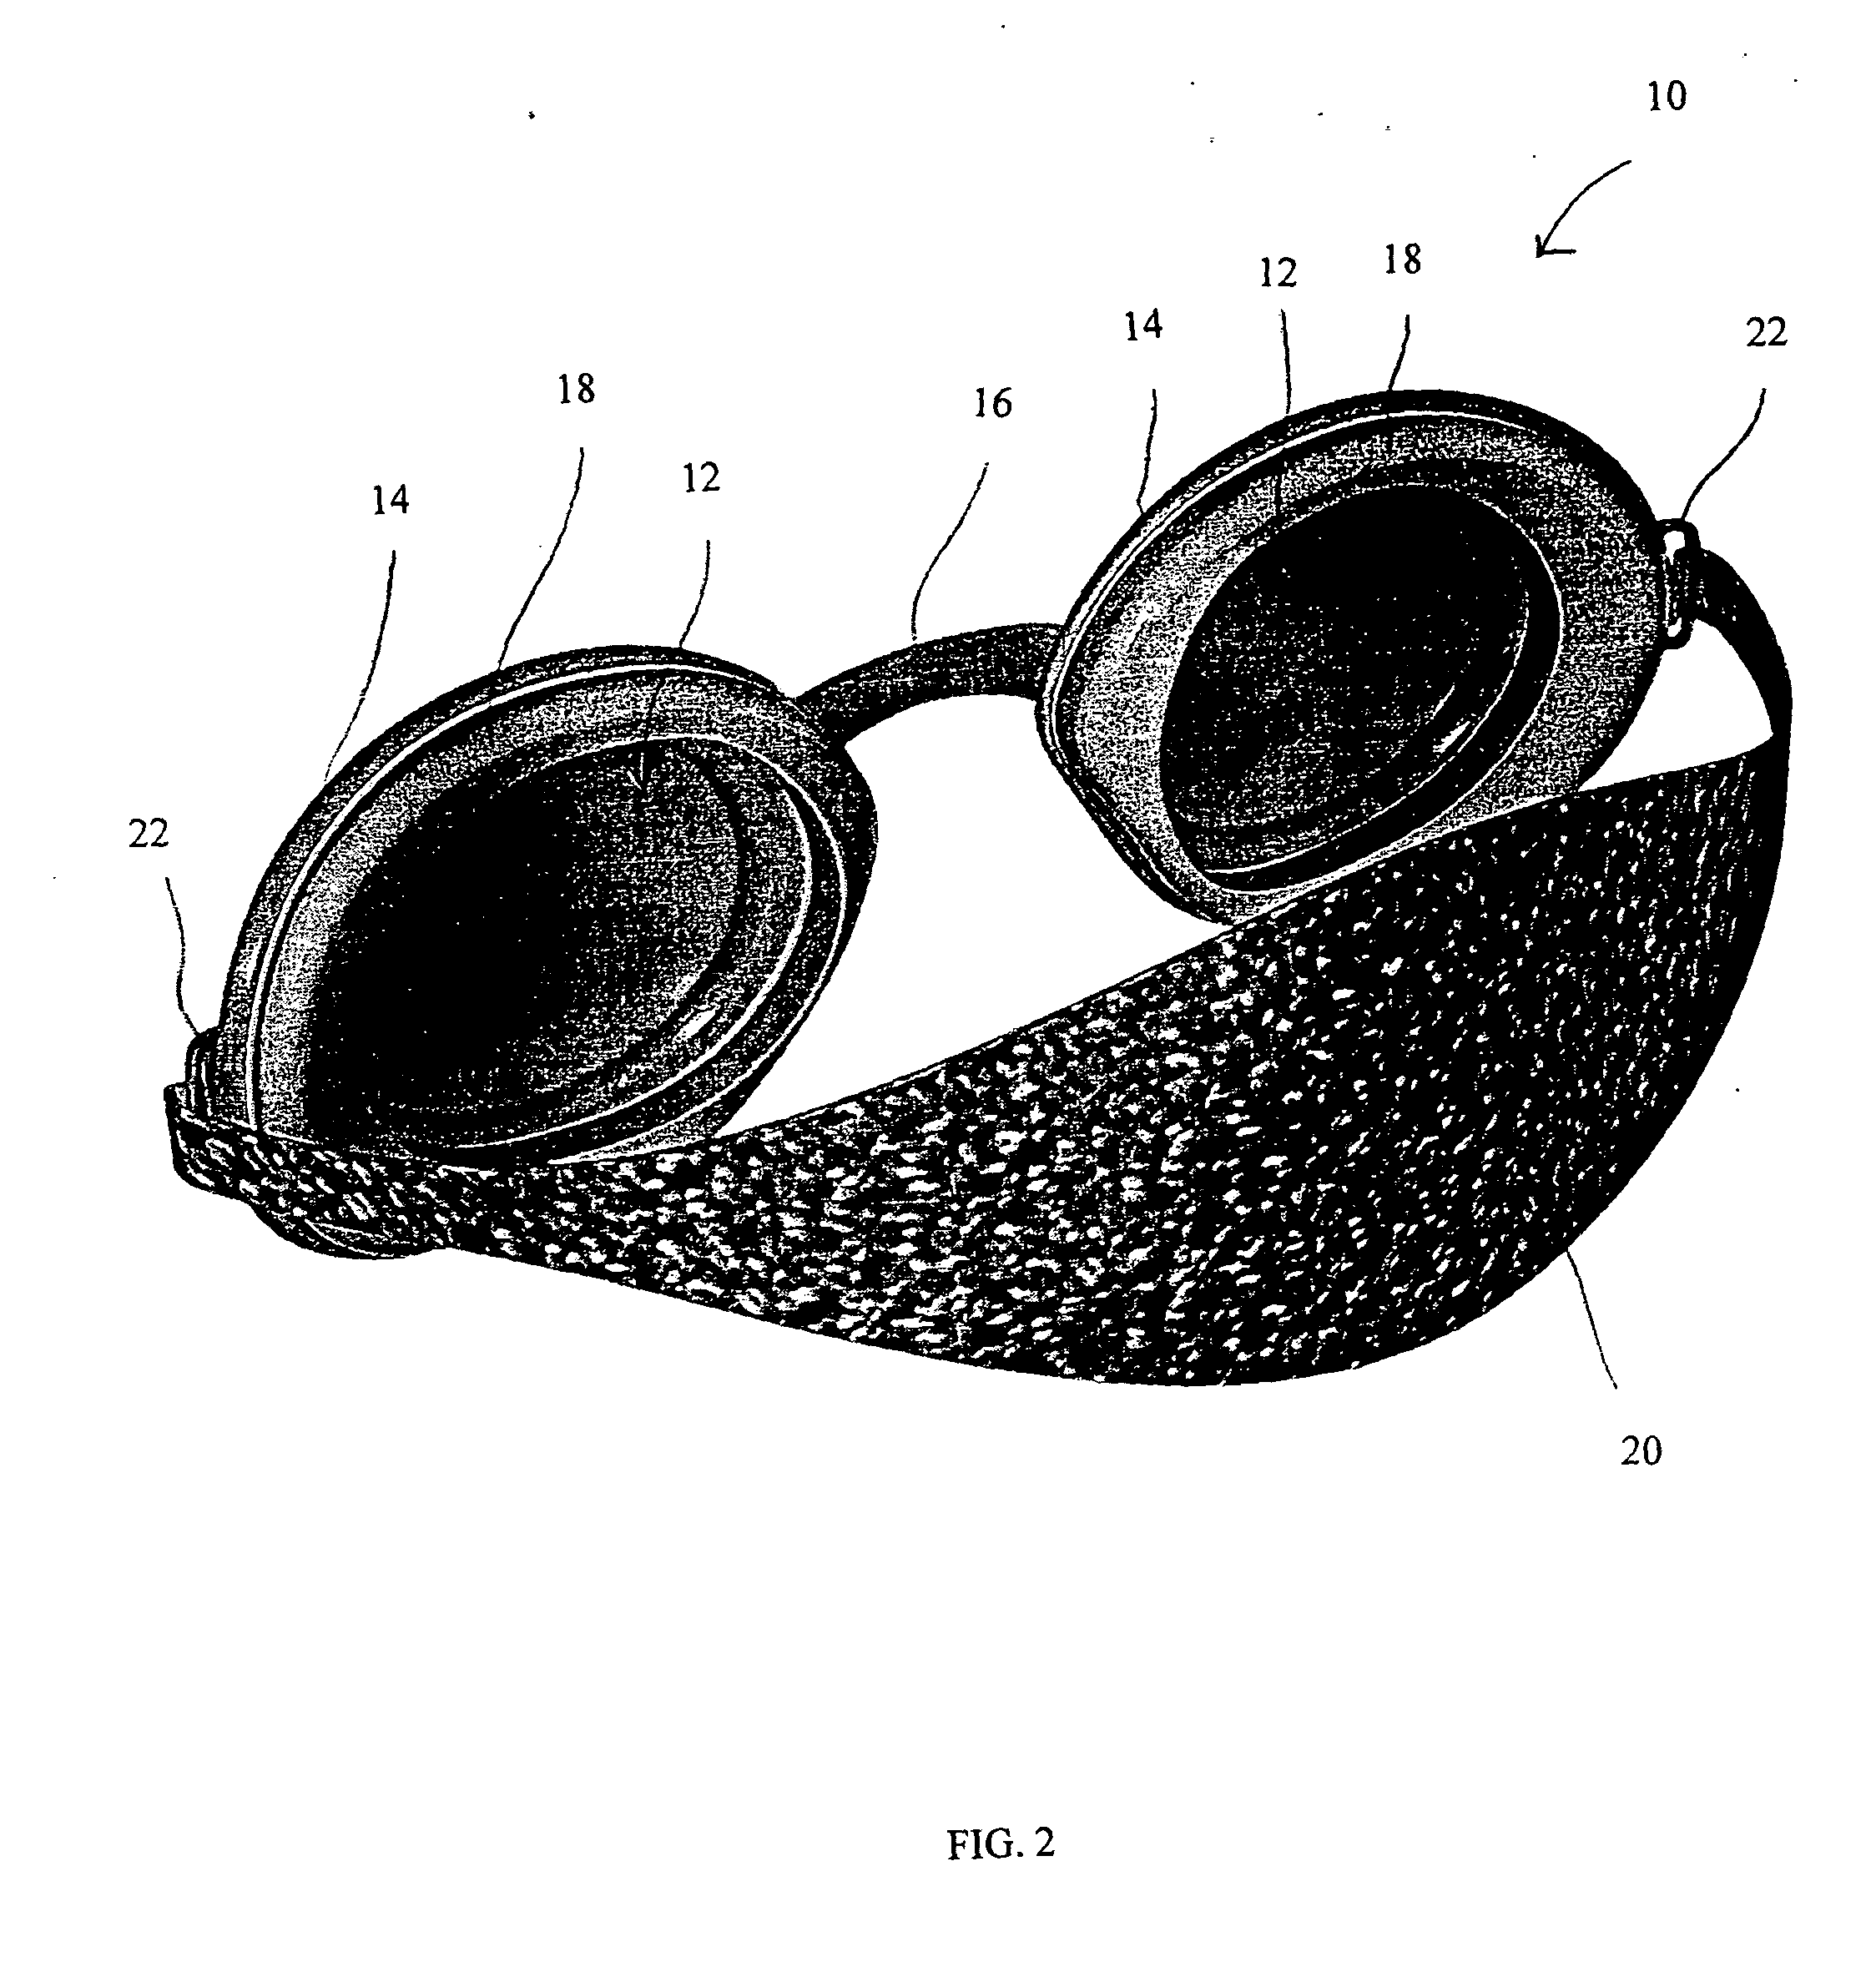 Apparatus, system and method for treating dry eye conditions and promoting healthy eyes